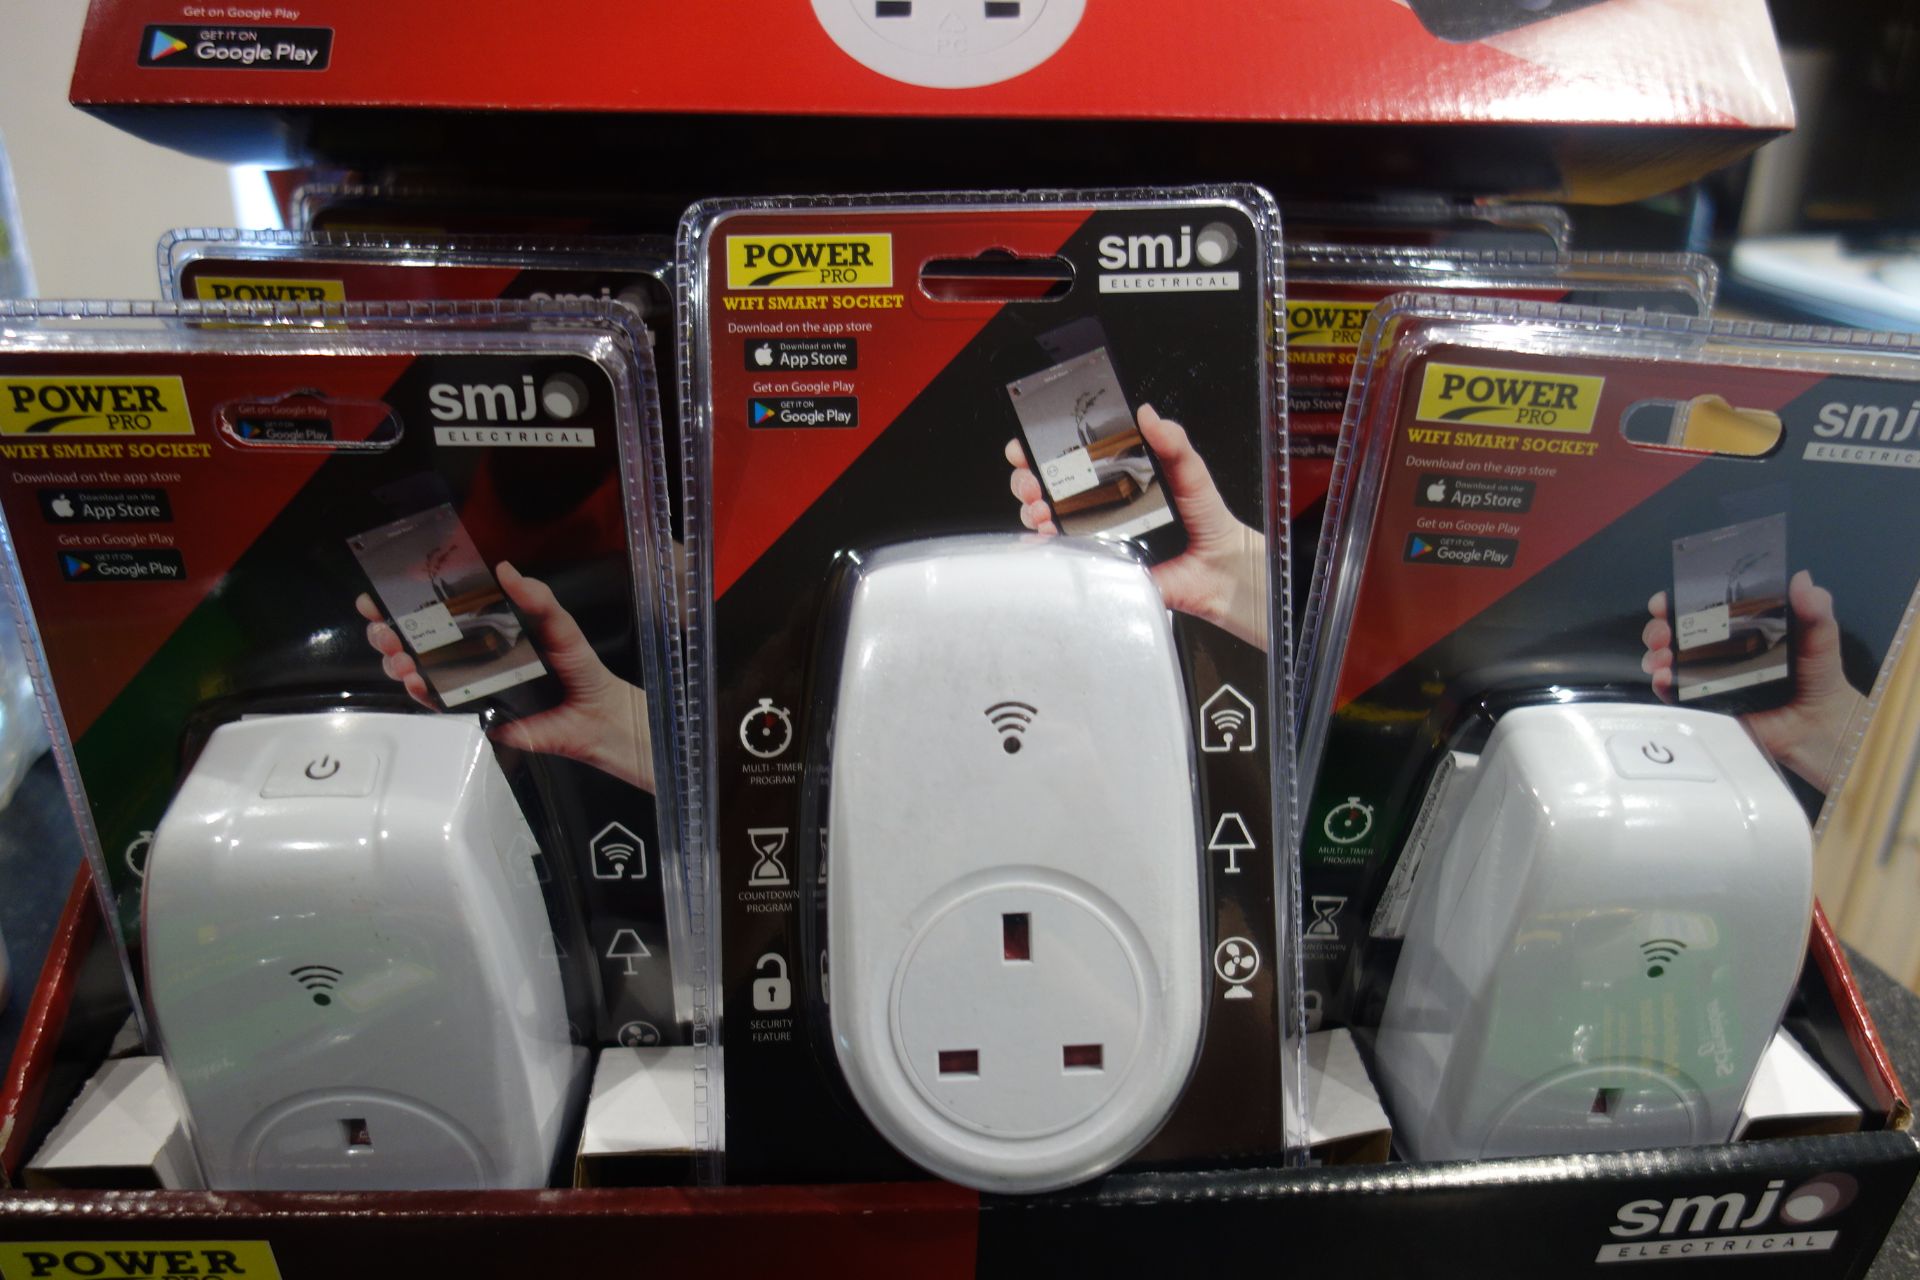 12 X SMJ Electrical Power Pro Wifi Socket Plug And Go Can Control Through The App Anywhere in the